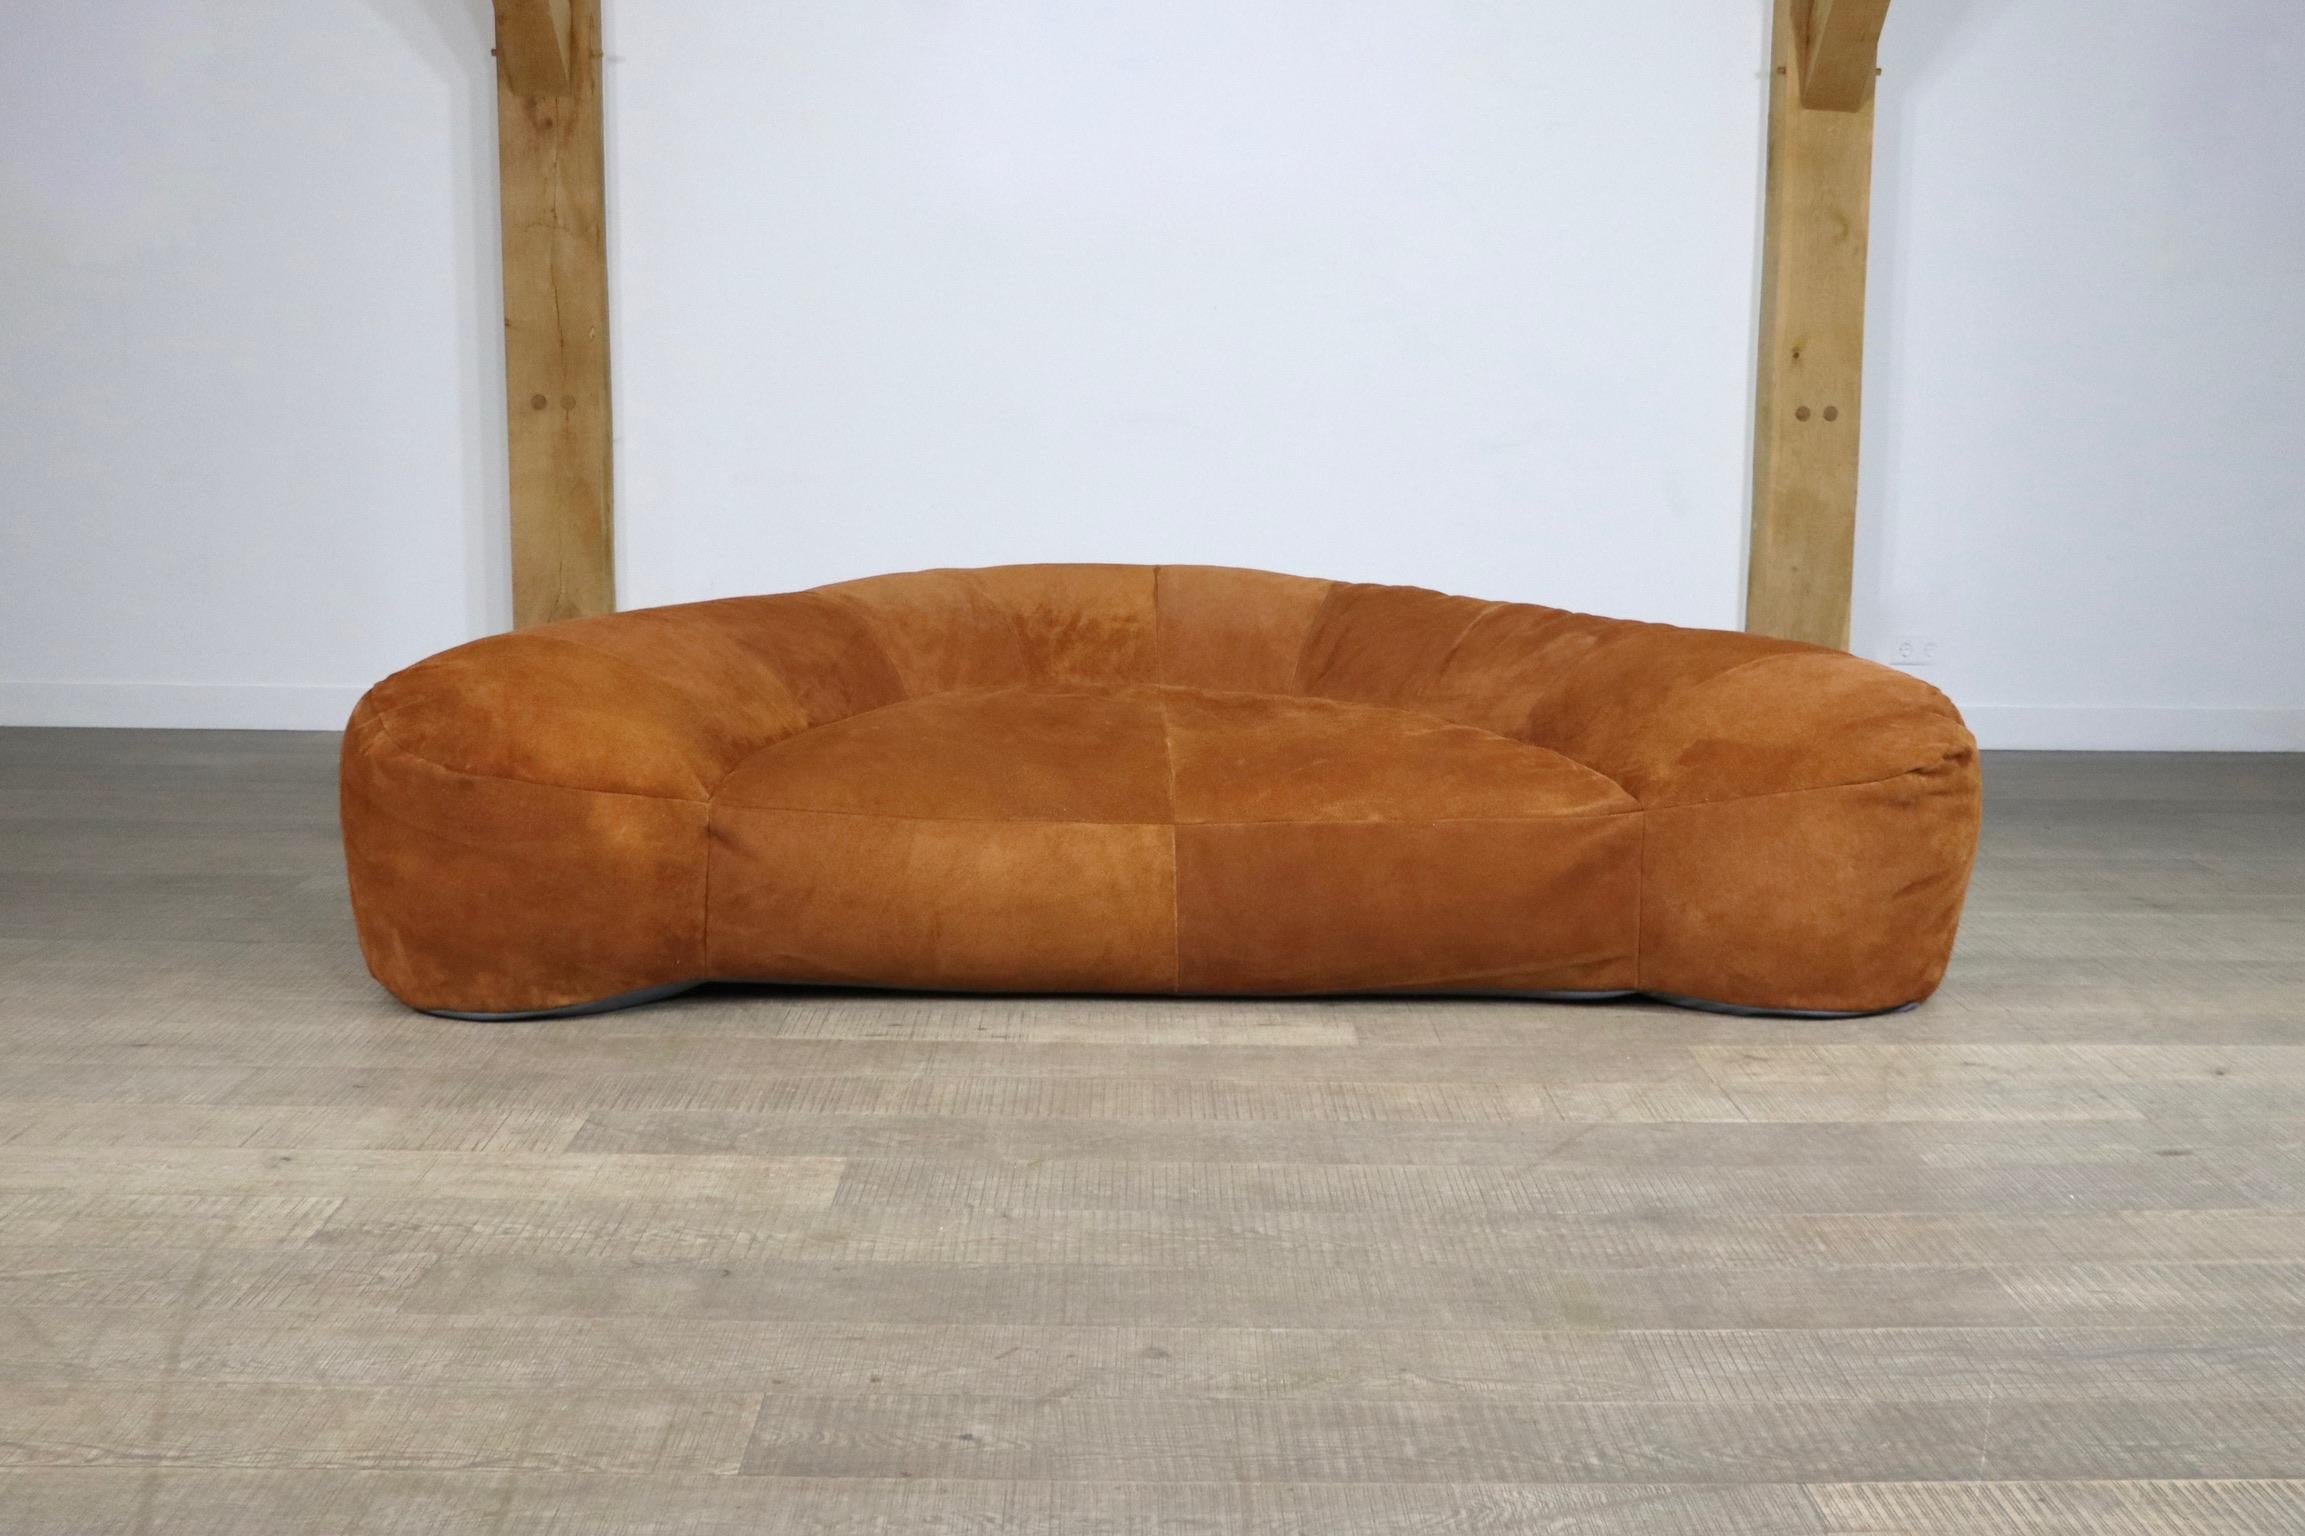 Incredible and rare croissant sofa in suede by Raphaël Raffel for Maison Honoré Paris, 1970s. This sofa, which was made to order from the 1970-1980s is besides its iconic design famous for its extremely high comfort. The stunning cognac suede is